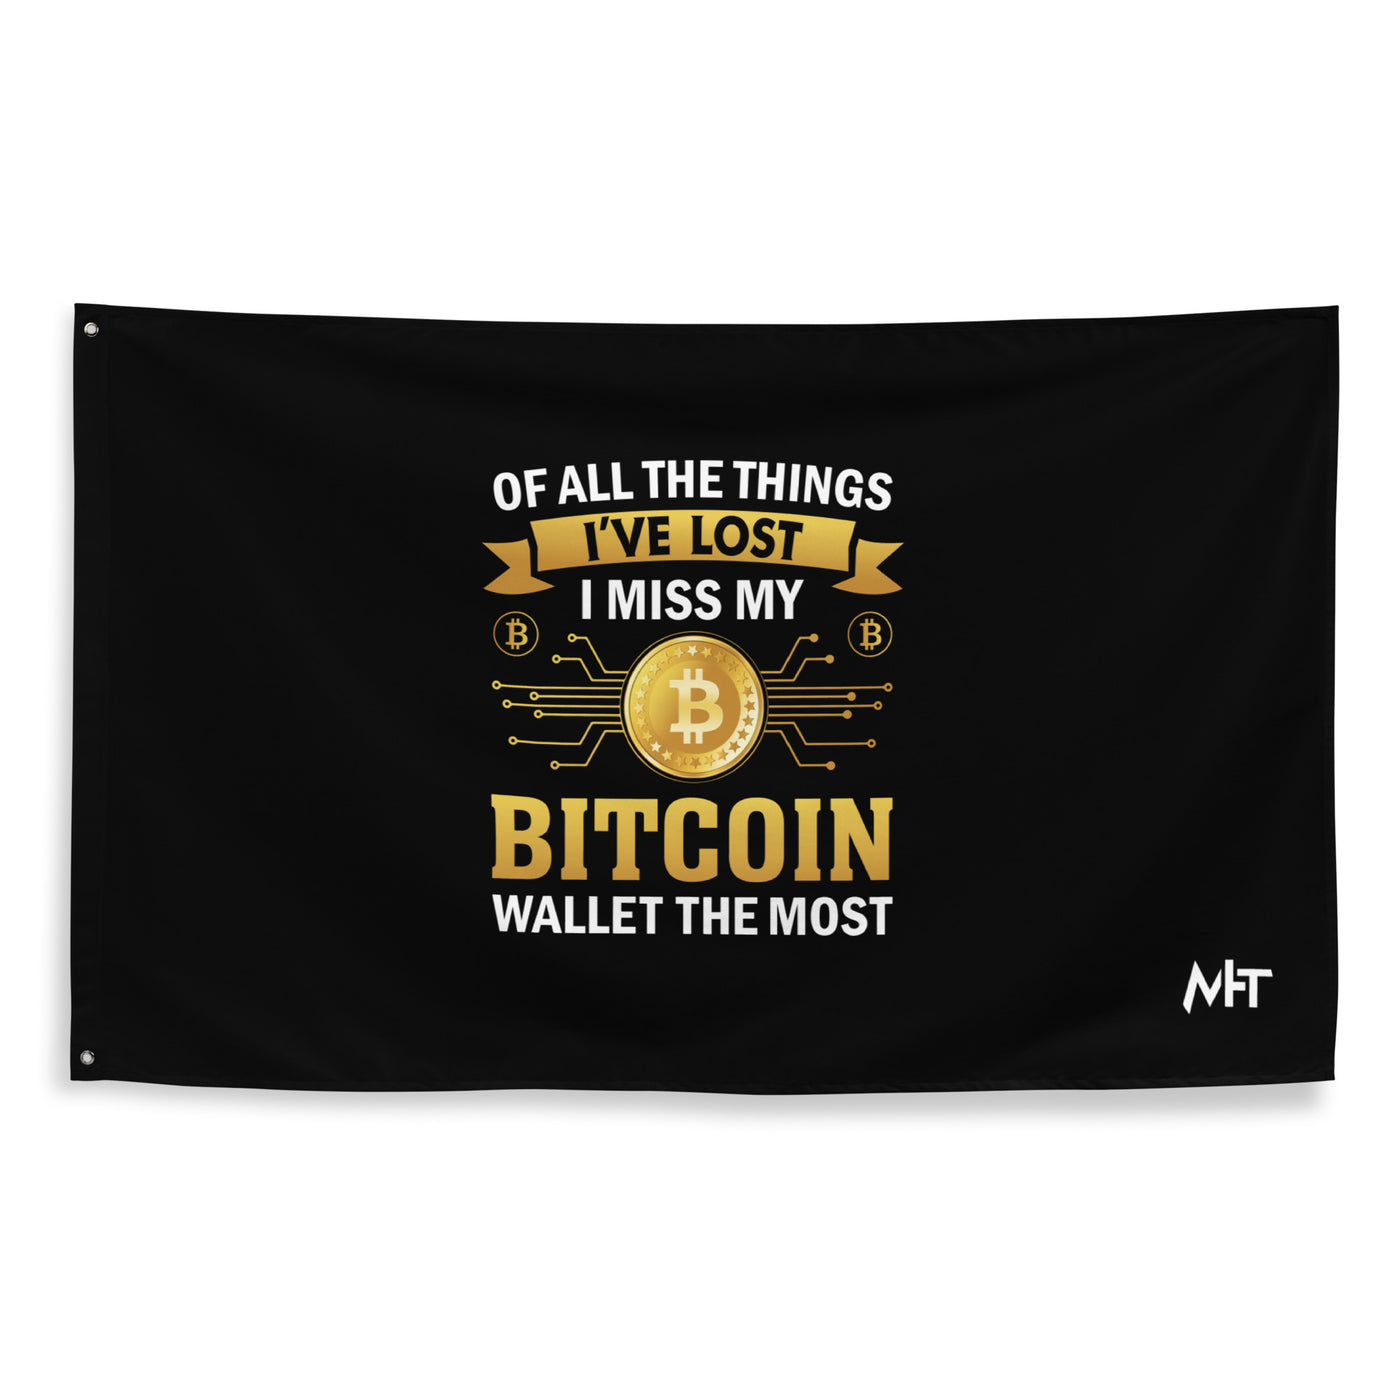 Of all the things  I've lost, I Miss my Bitcoin the most - Flag